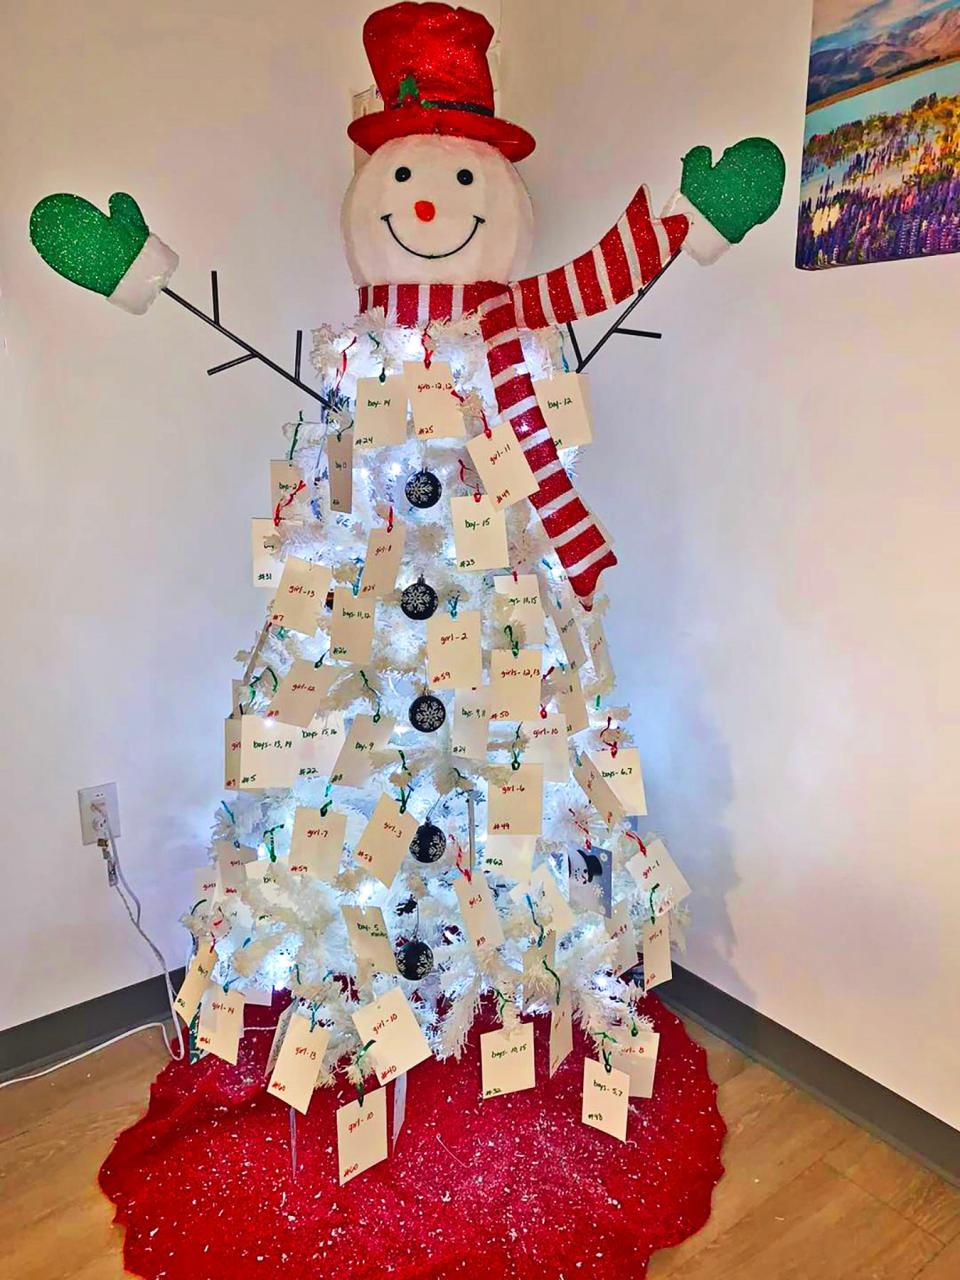 This snowman giving tree is located in the Pueblo West Metro District water office at 20 W. Palmer Lake Drive. Residents can grab a tag and return a gift by Dec. 8 to help Pueblo County School District 70 students in need.